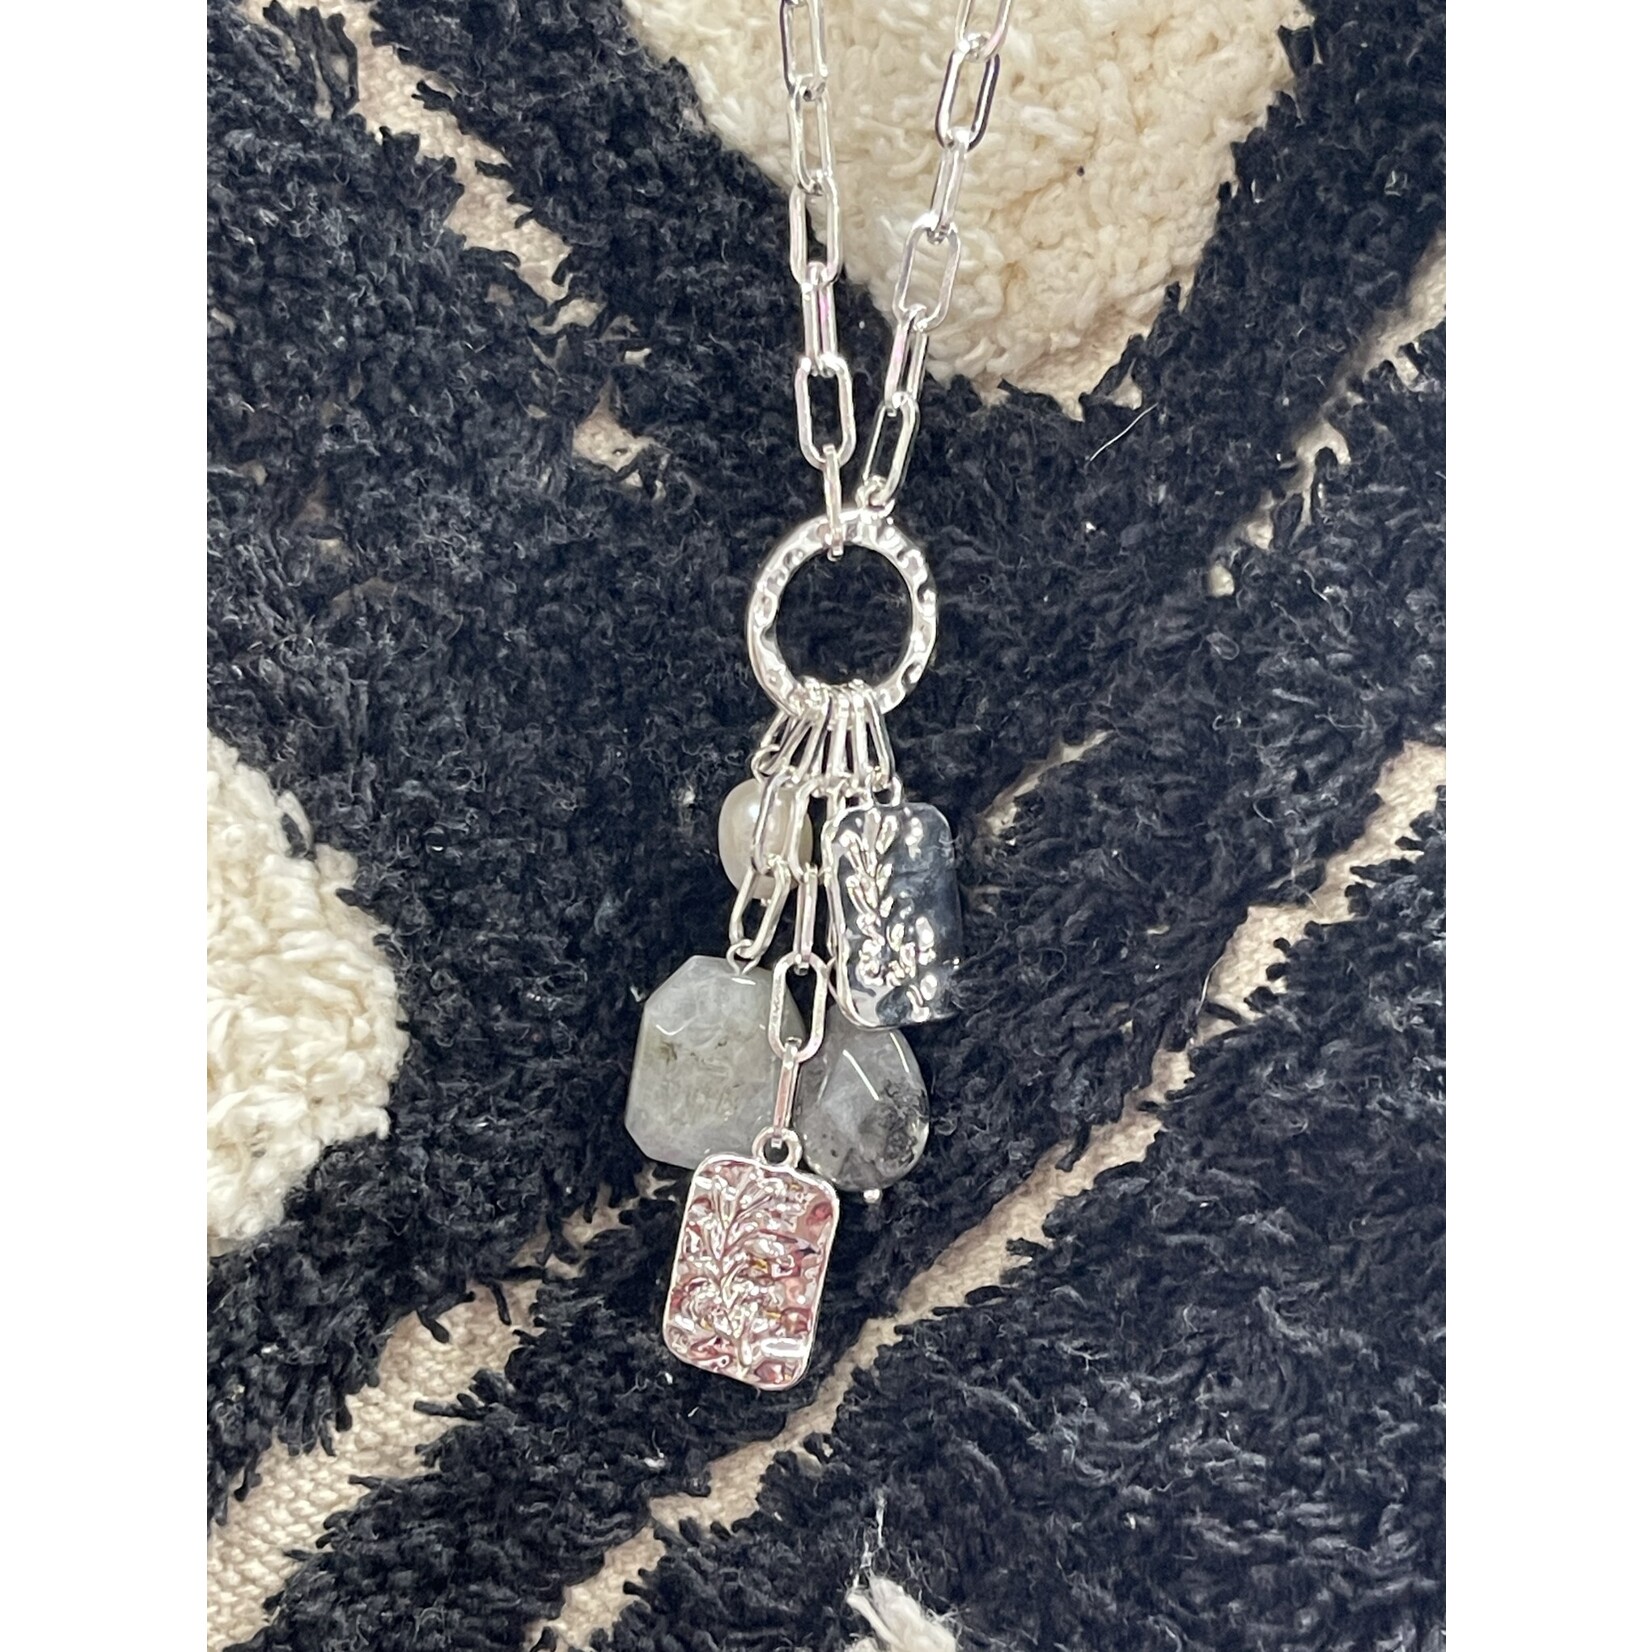 American Unique  Group Long Silver Chain with Charms